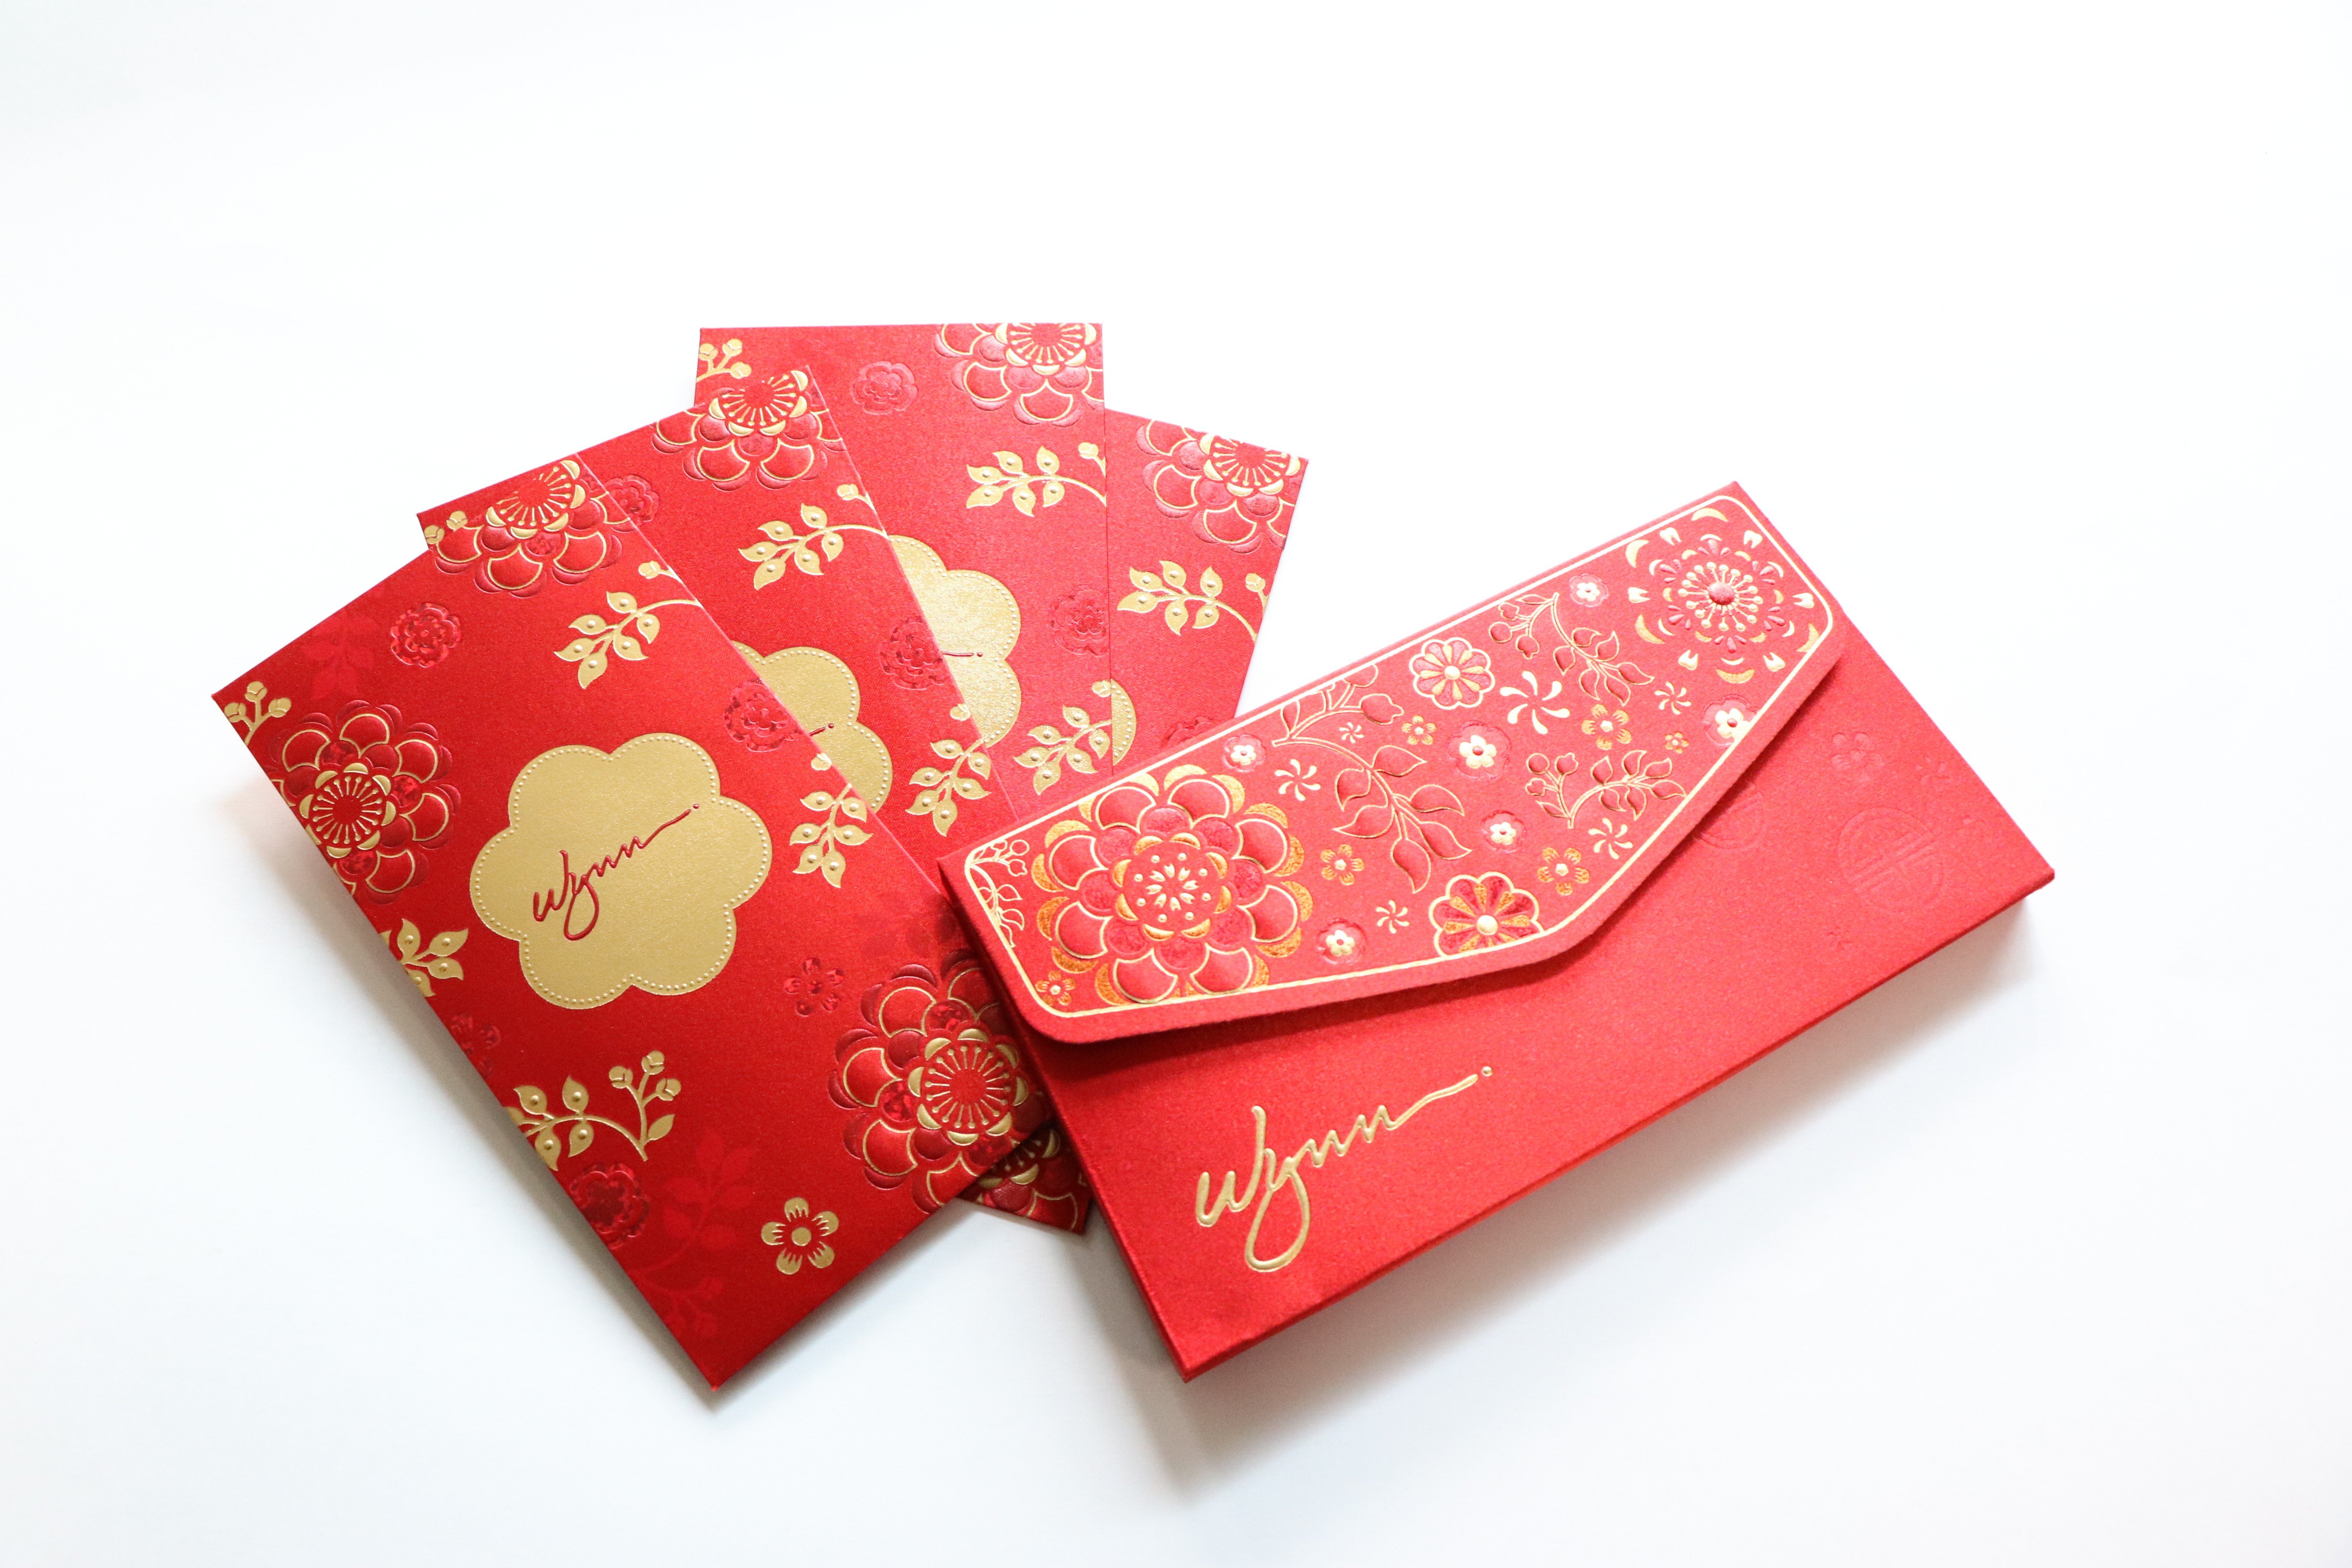 Top 15 luxury red envelopes for Lunar New Year 2018 Style Magazine